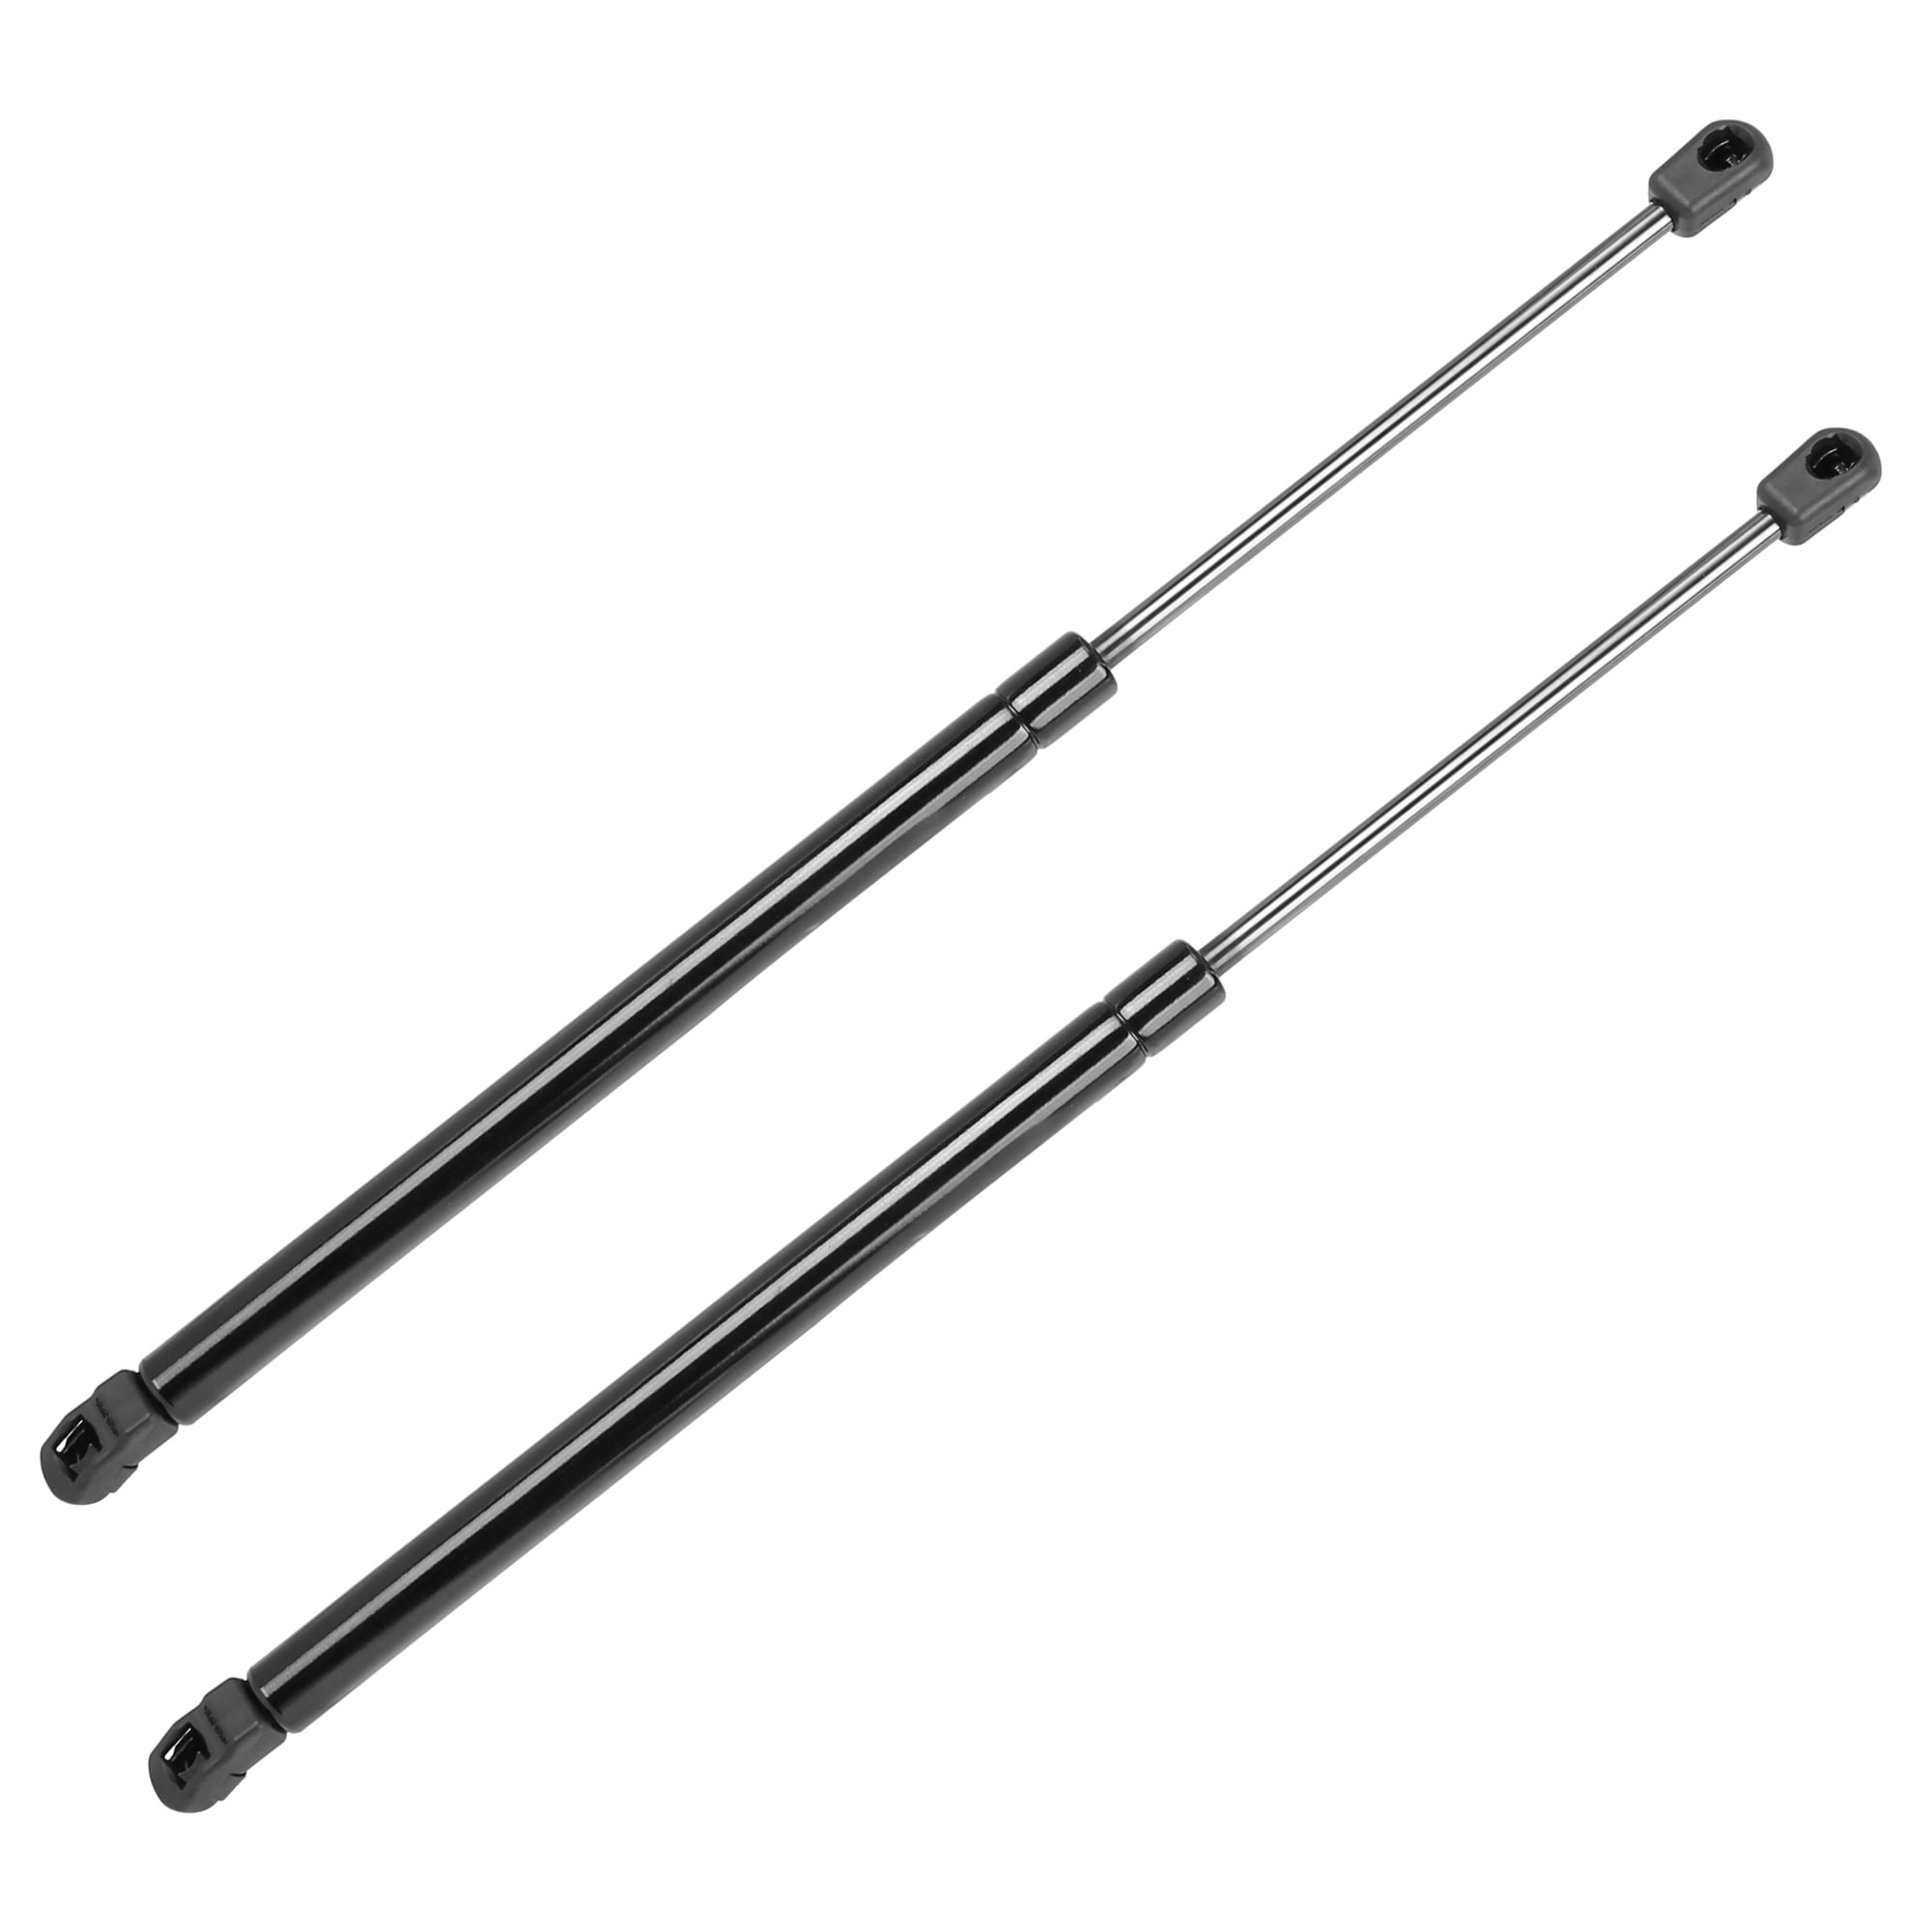 2Pcs Front HOOD Struts Lift Supports Shock Gas Spring Prop Rod Compatible With KIA 2011-2015 SORENTO Note: Sport Utility 4-Door